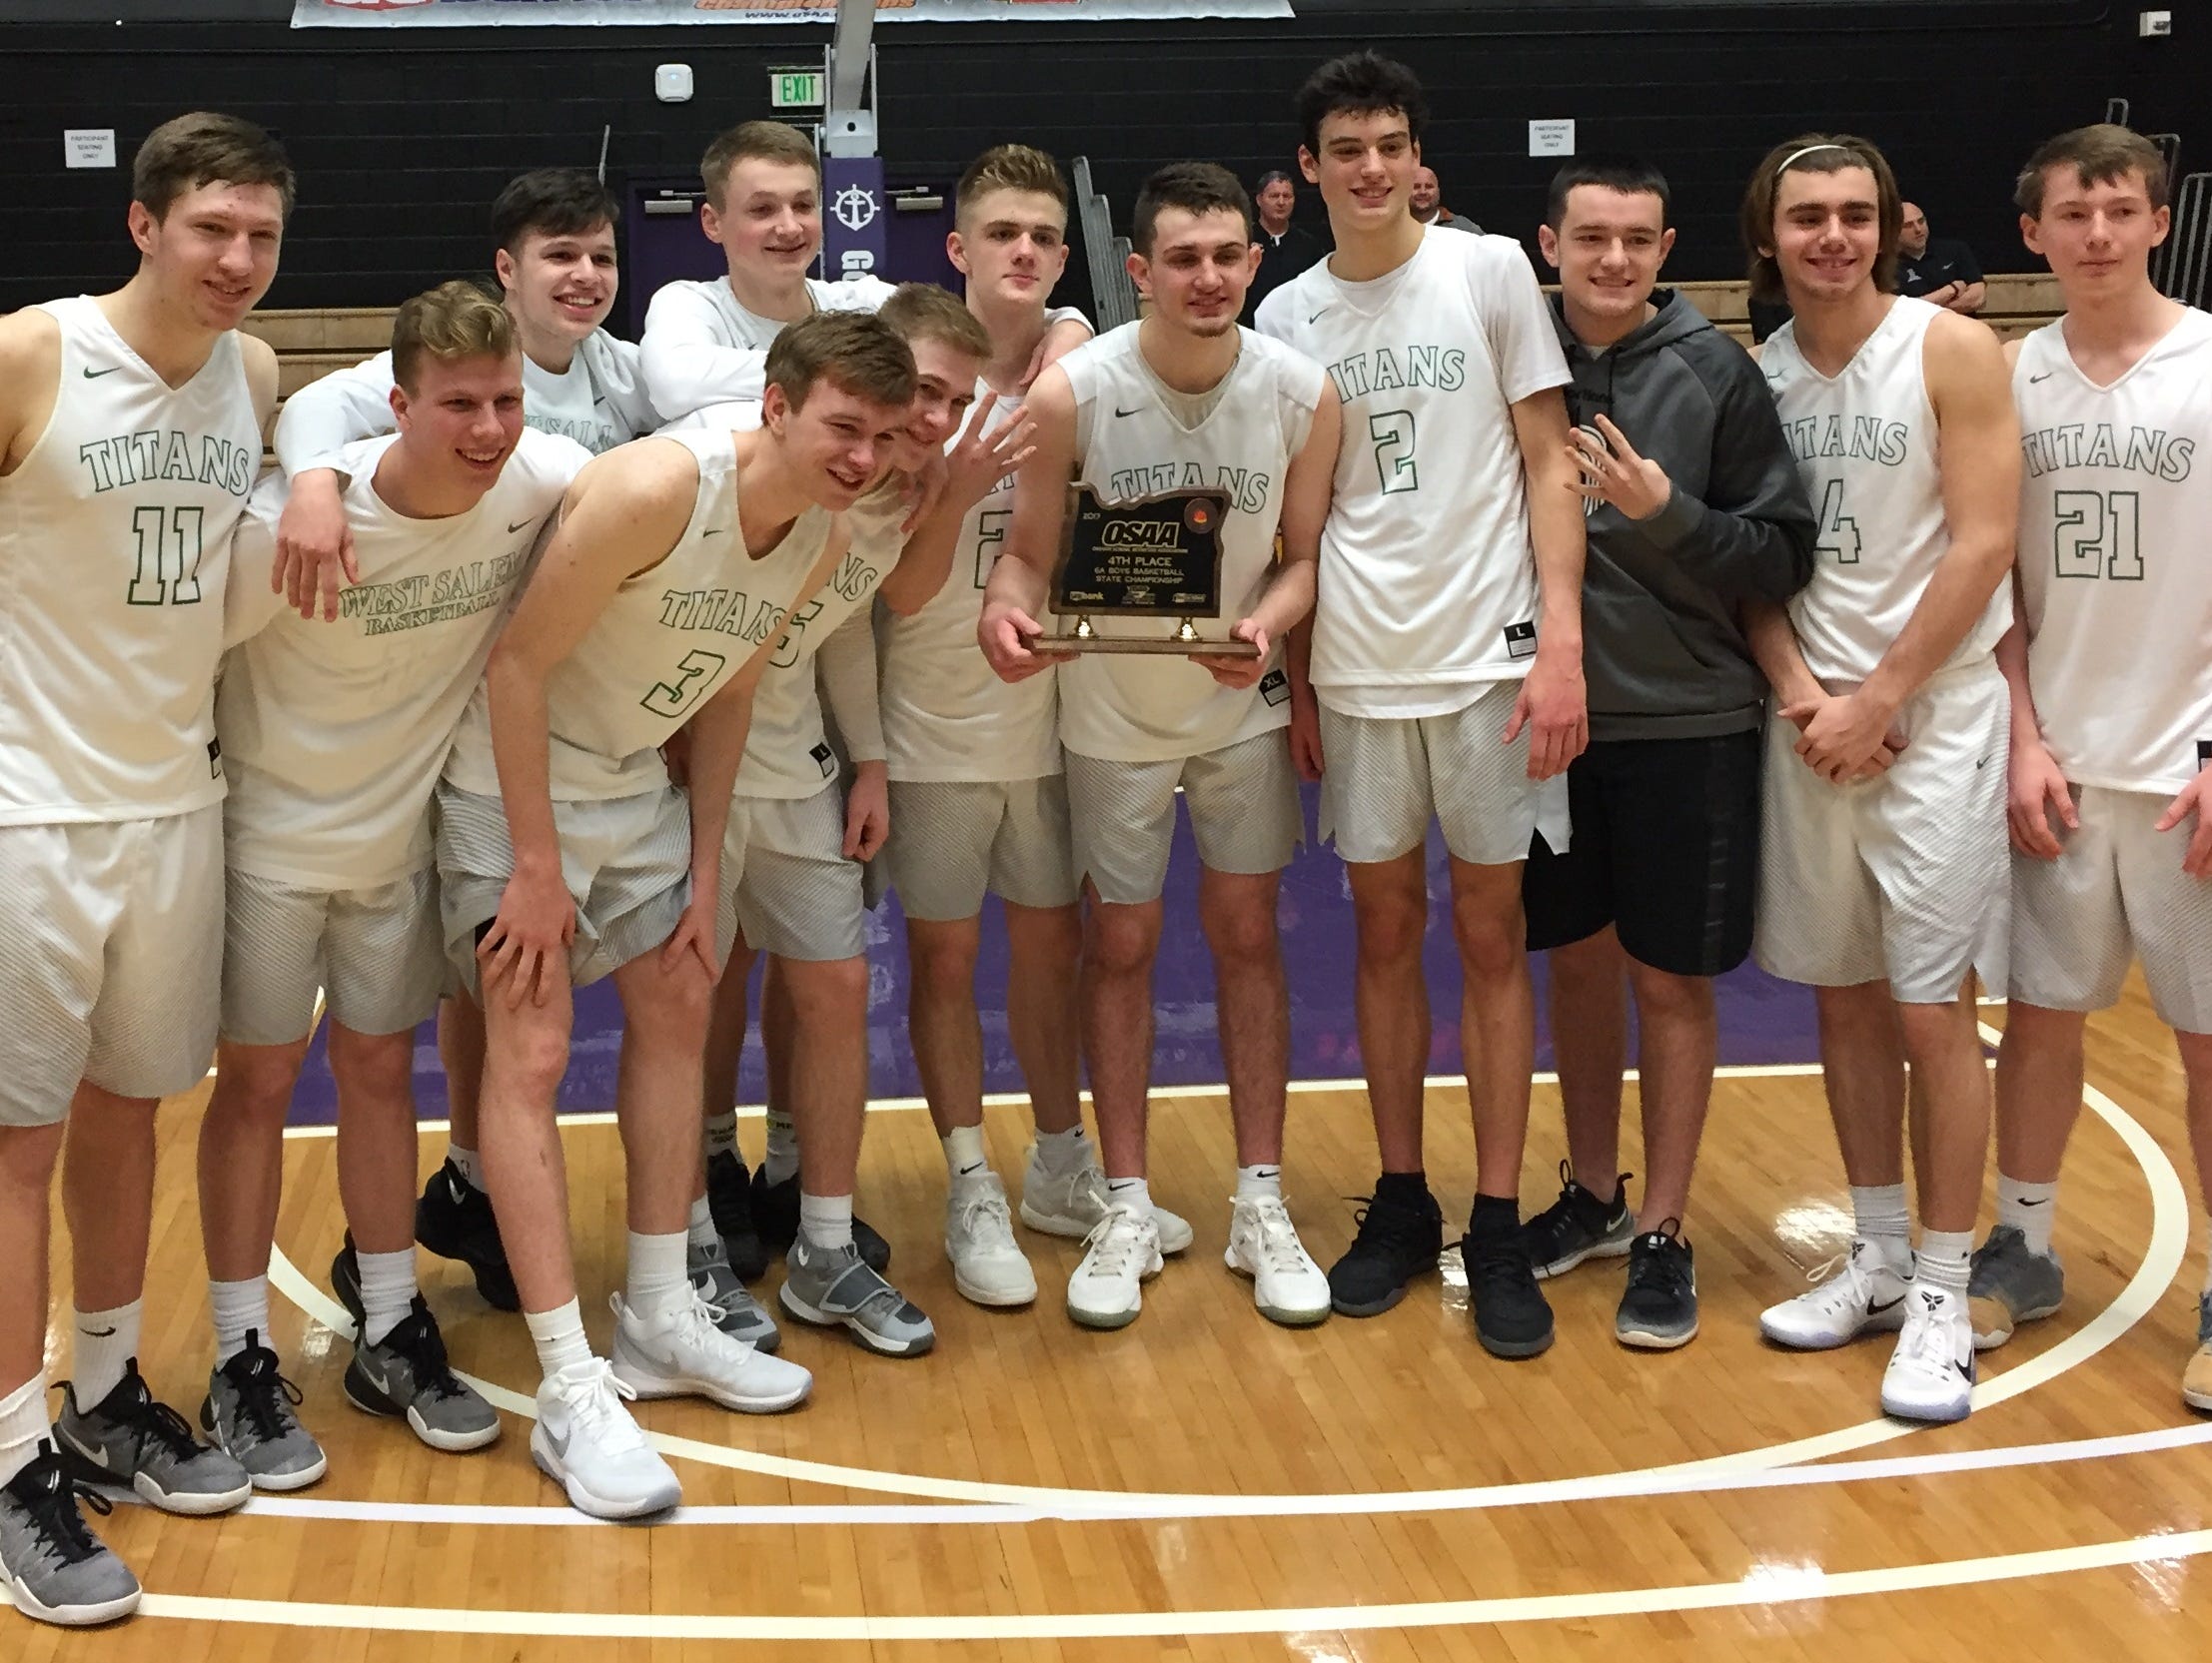 West Salem High School's boys basketball team placed fourth at the OSAA Class 6A state tournament on Saturday, March 11, 2017.